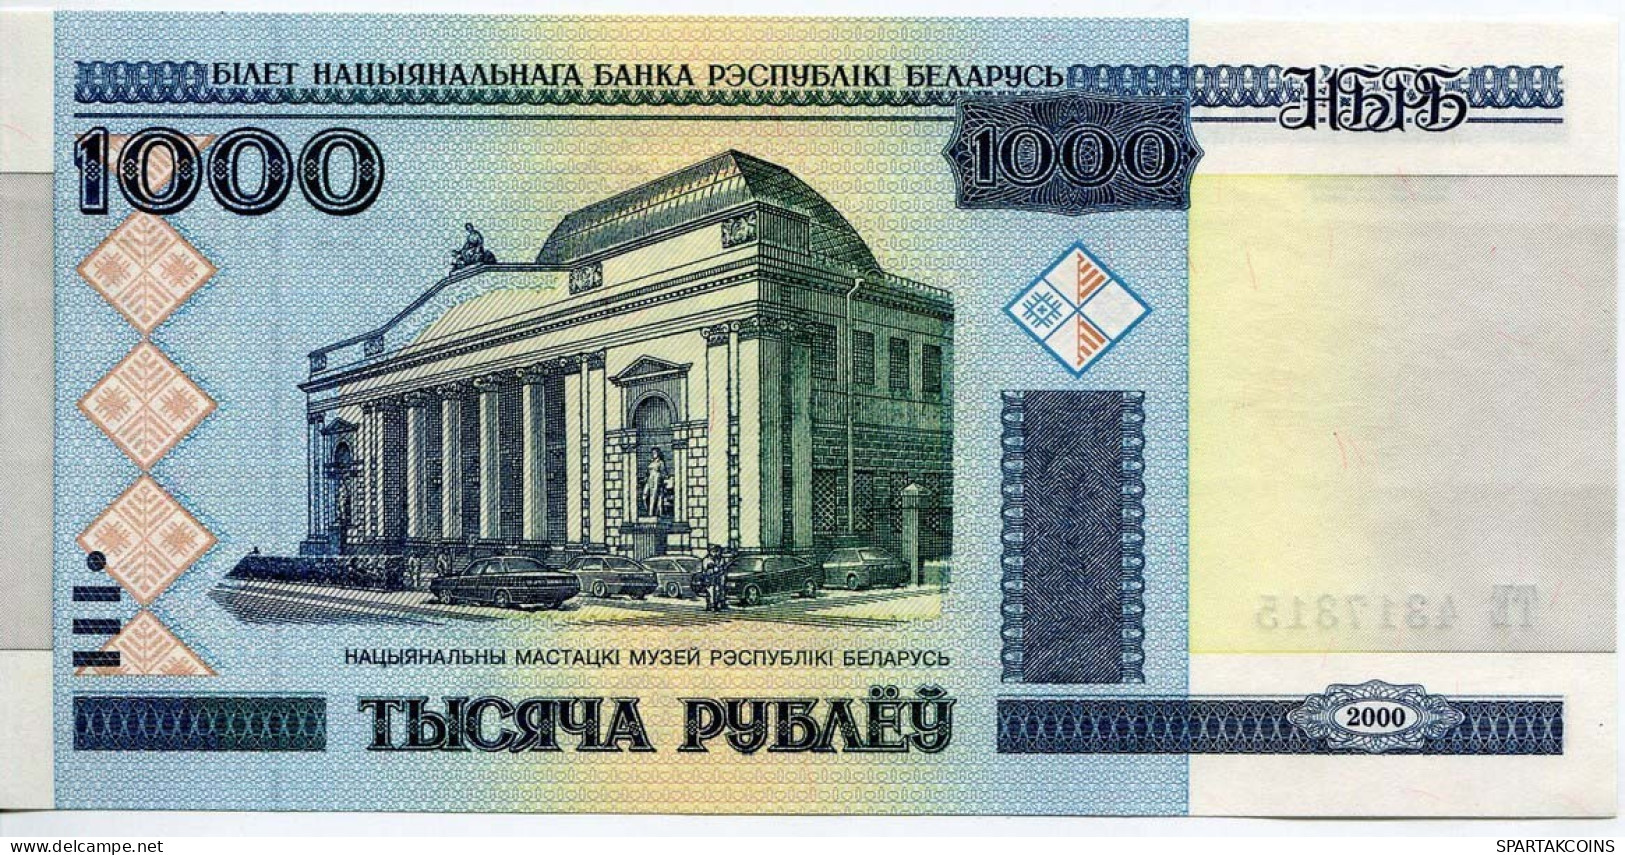 BELARUS 1000 RUBLES 2000 Museum Of Applied Arts Paper Money Banknote #P10204.V - [11] Local Banknote Issues